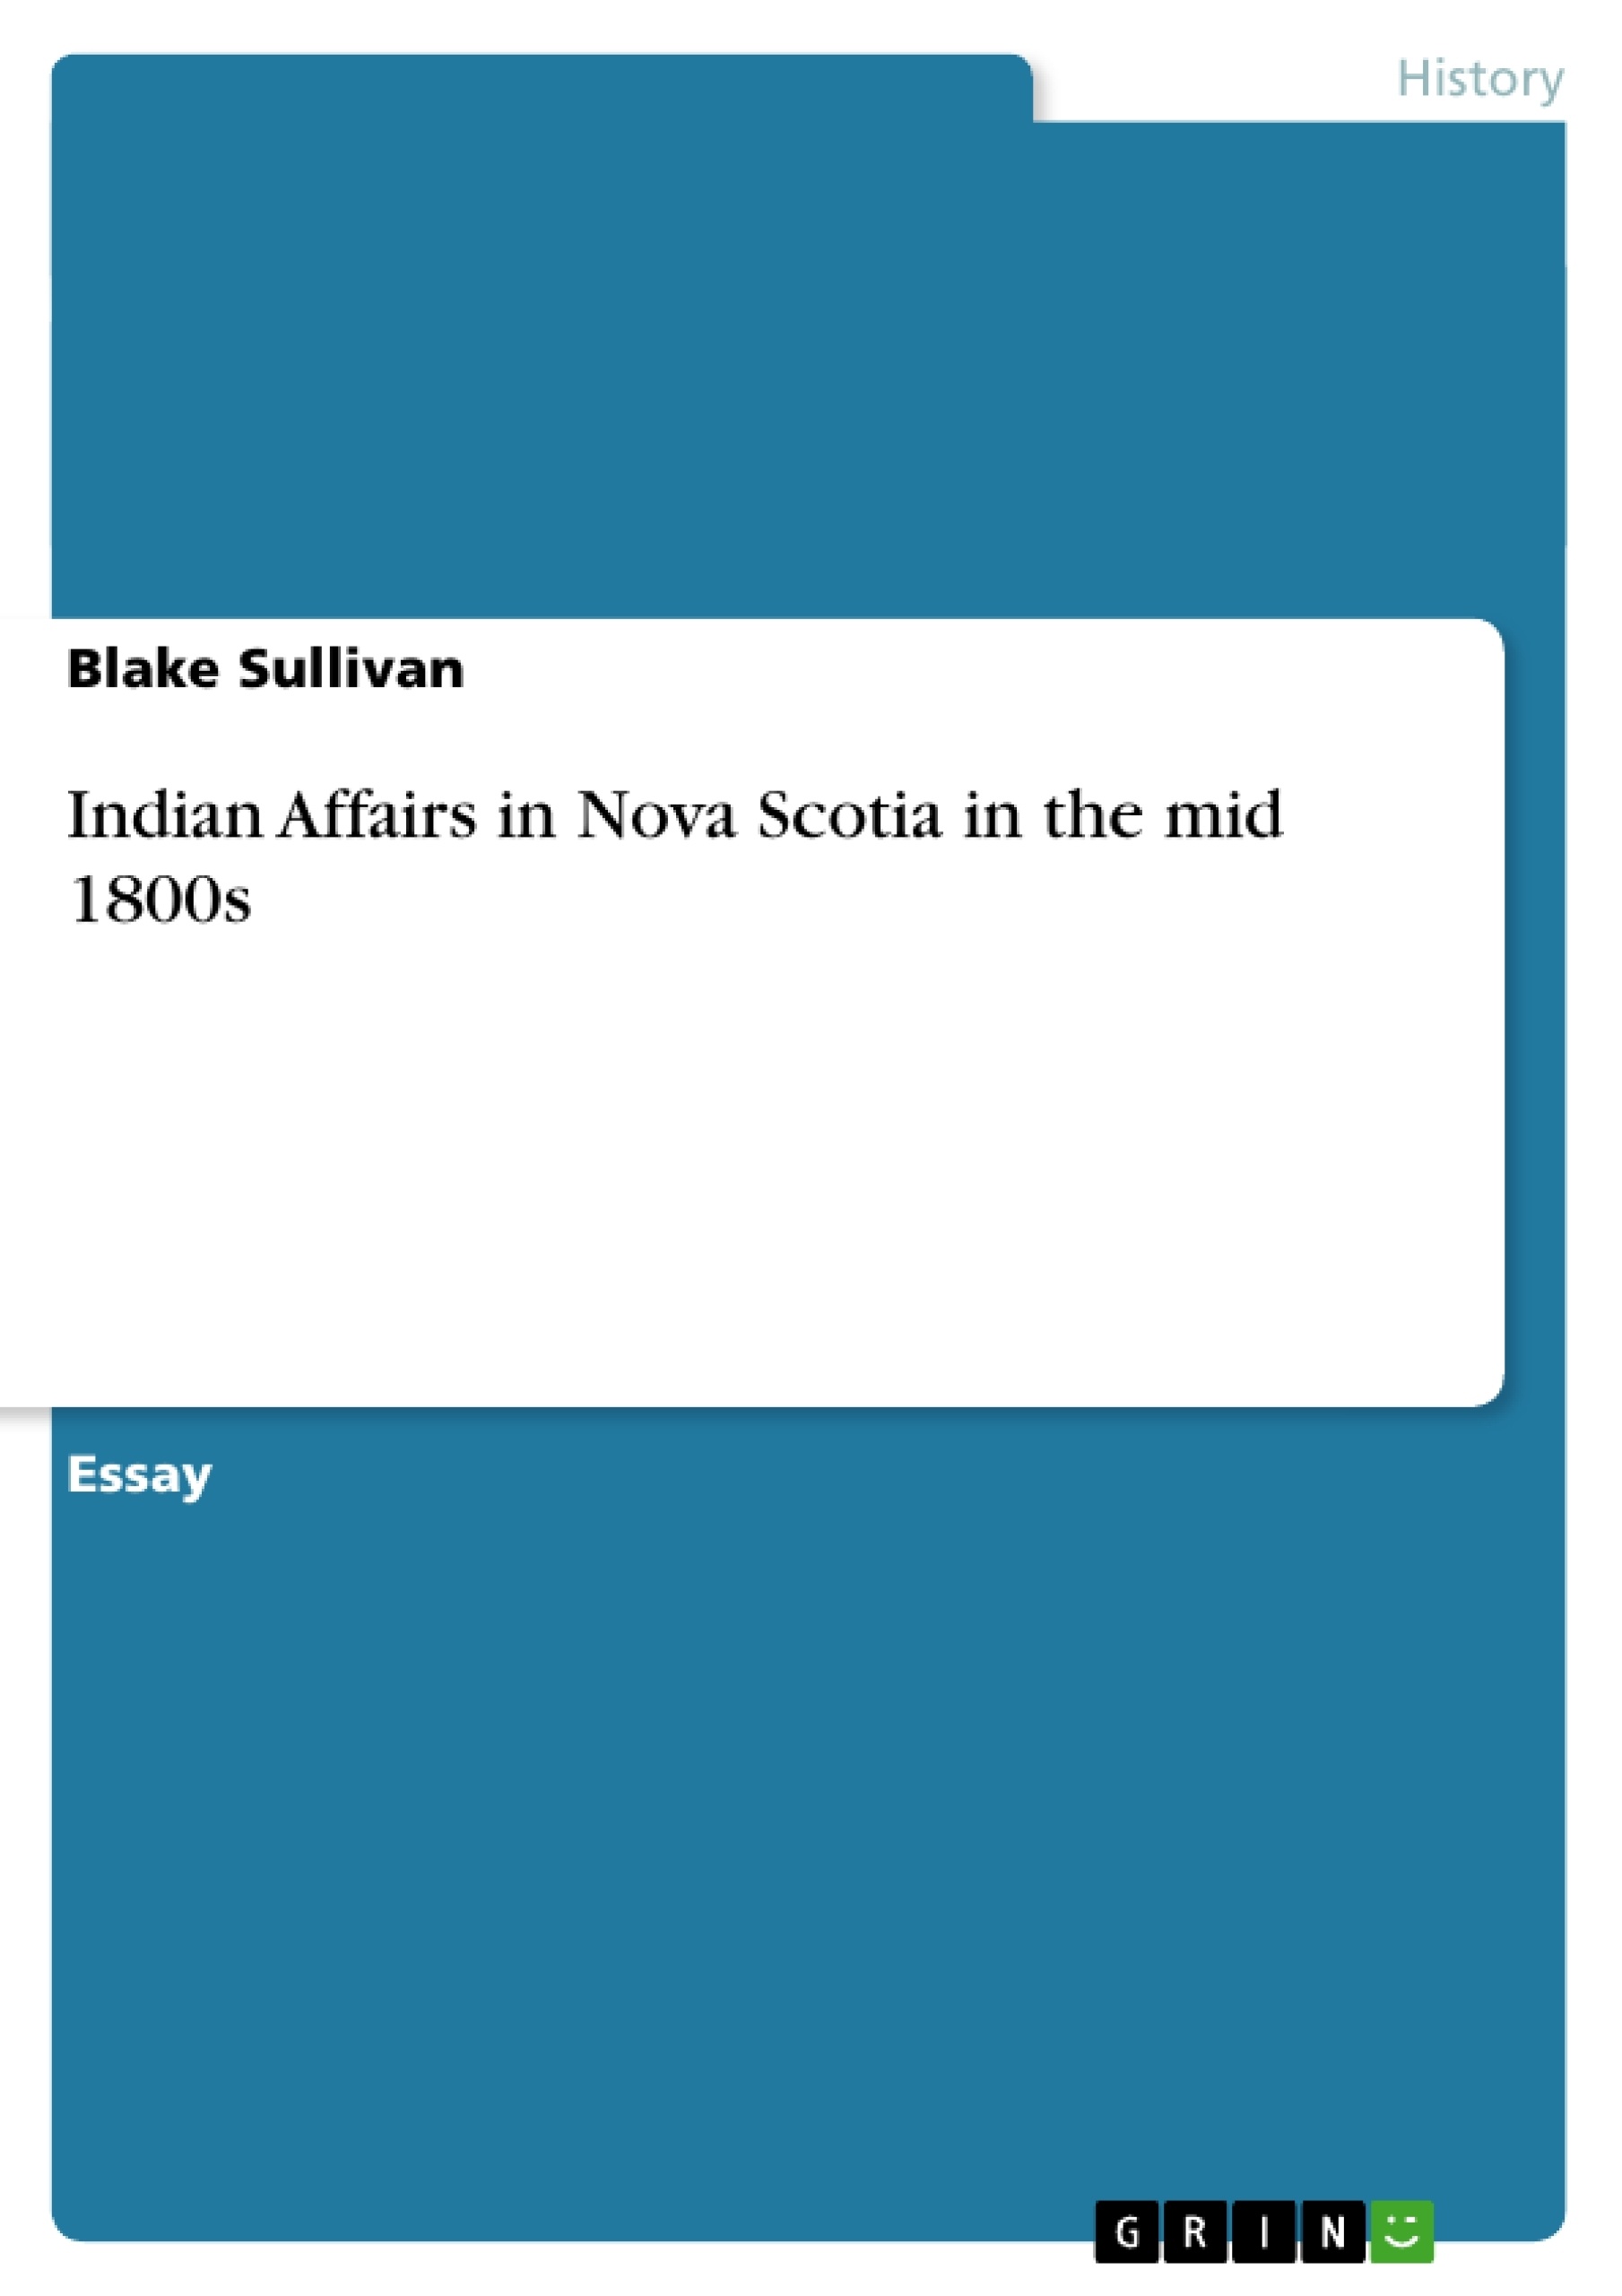 Title: Indian Affairs in Nova Scotia in the mid 1800s